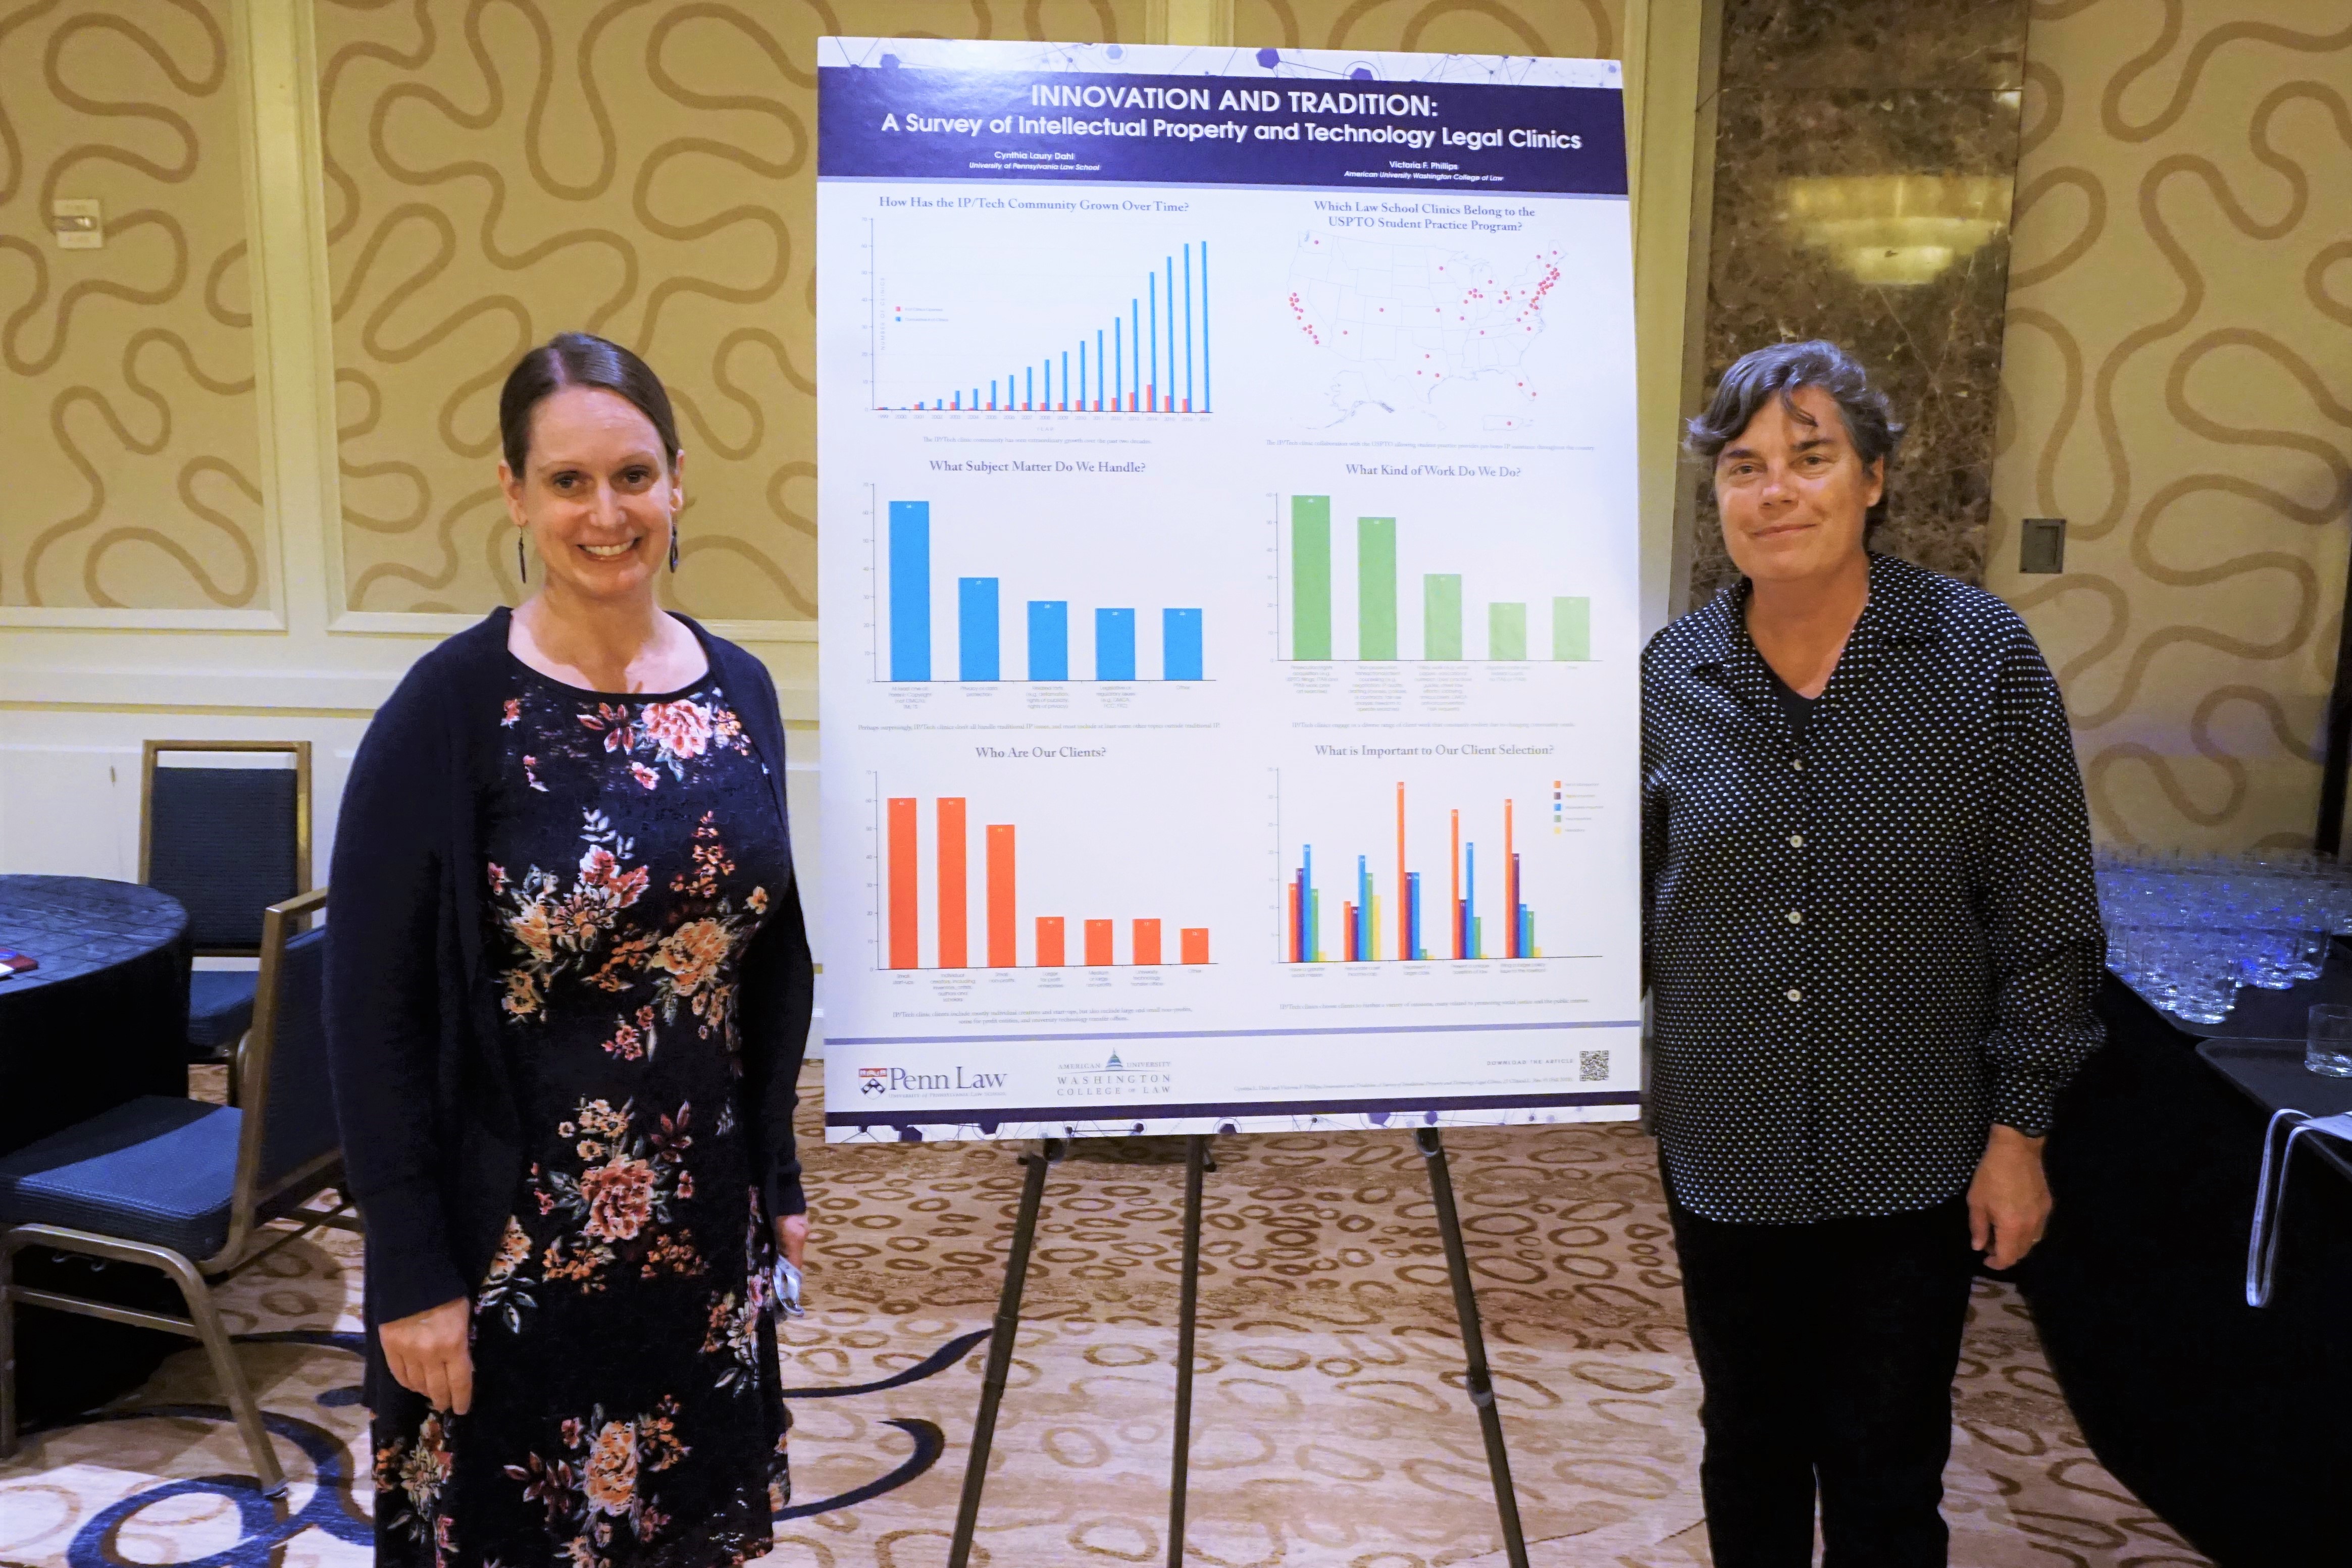 Cynthia Dahl (University of Pennsylvania Law) and Victoria F. Phillips (American University Washington College of Law) discuss their poster "Innovation and Tradition: A Survey of Intellectual Property and Technology Legal Clinics."